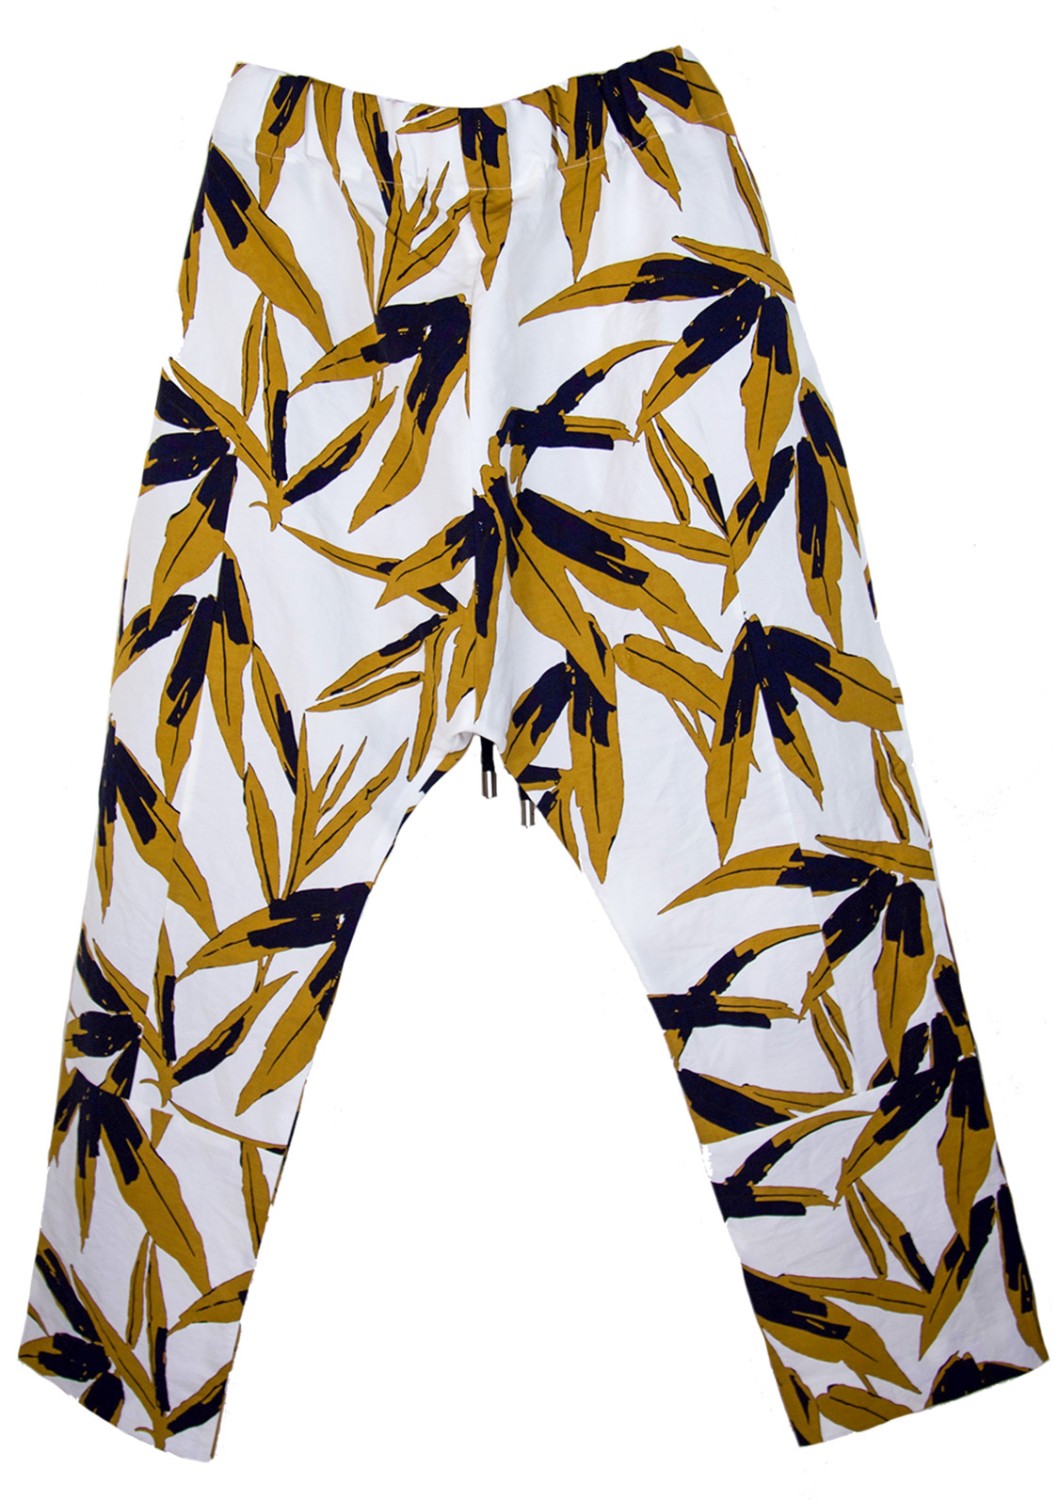 shop Marni  Pants: Pants Marni in washed linen and cotton printed swash, closure in front with coulisse and three bottons, high waist, lenght above the ankle.

Composition: 46% linen, 46% cotton, 8% elastan.
 number 873